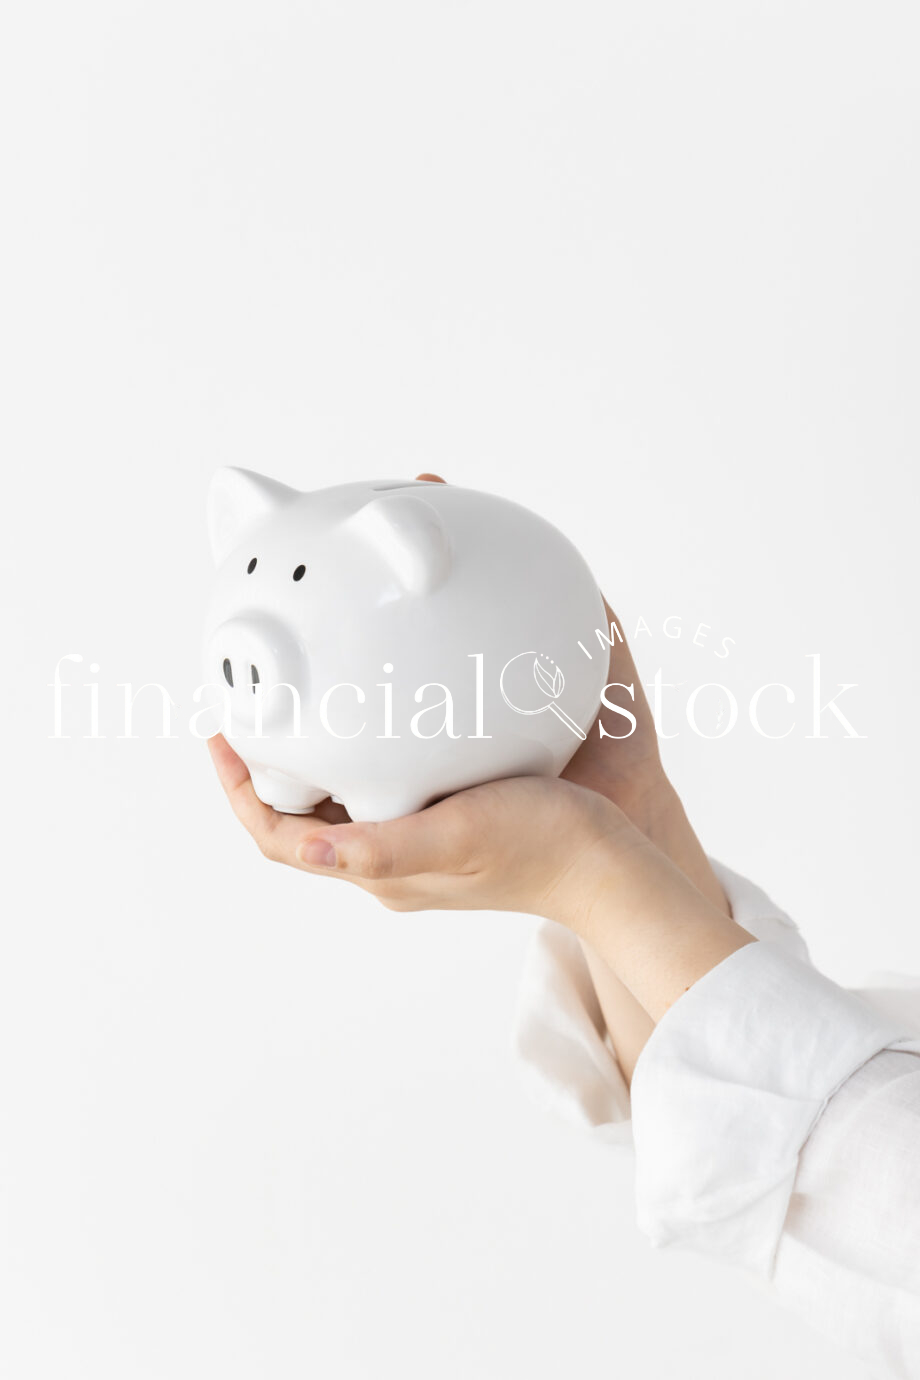 Financial Stock Images - Home office images and settings.